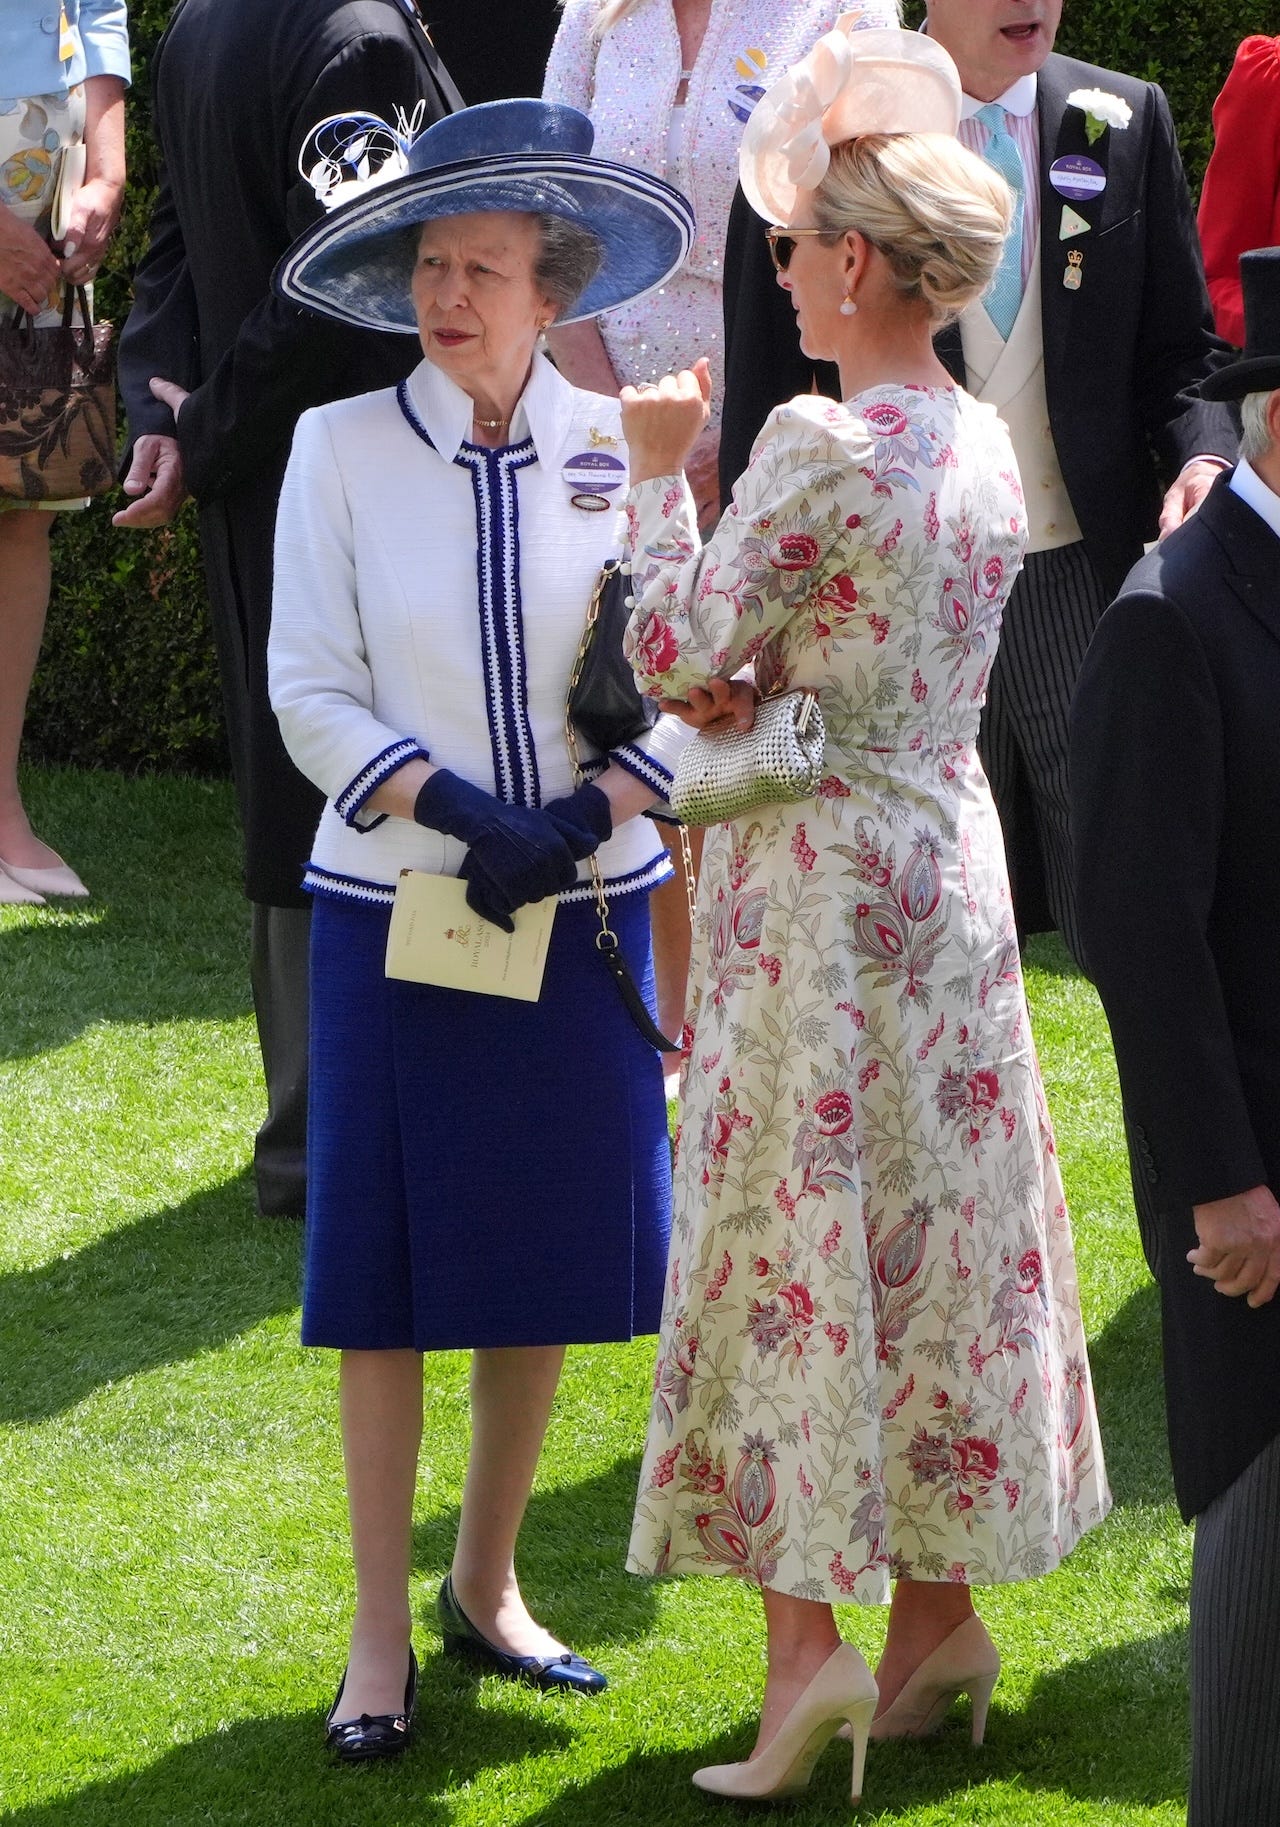 <p>Anne paired a royal-blue midi skirt with a white jacket with blue trim layered over a collared shirt.</p><p>Although her look was tame compared to her outfit on day one, she did accessorize with a sizable blue-and-white hat decorated with floral appliqué.</p>